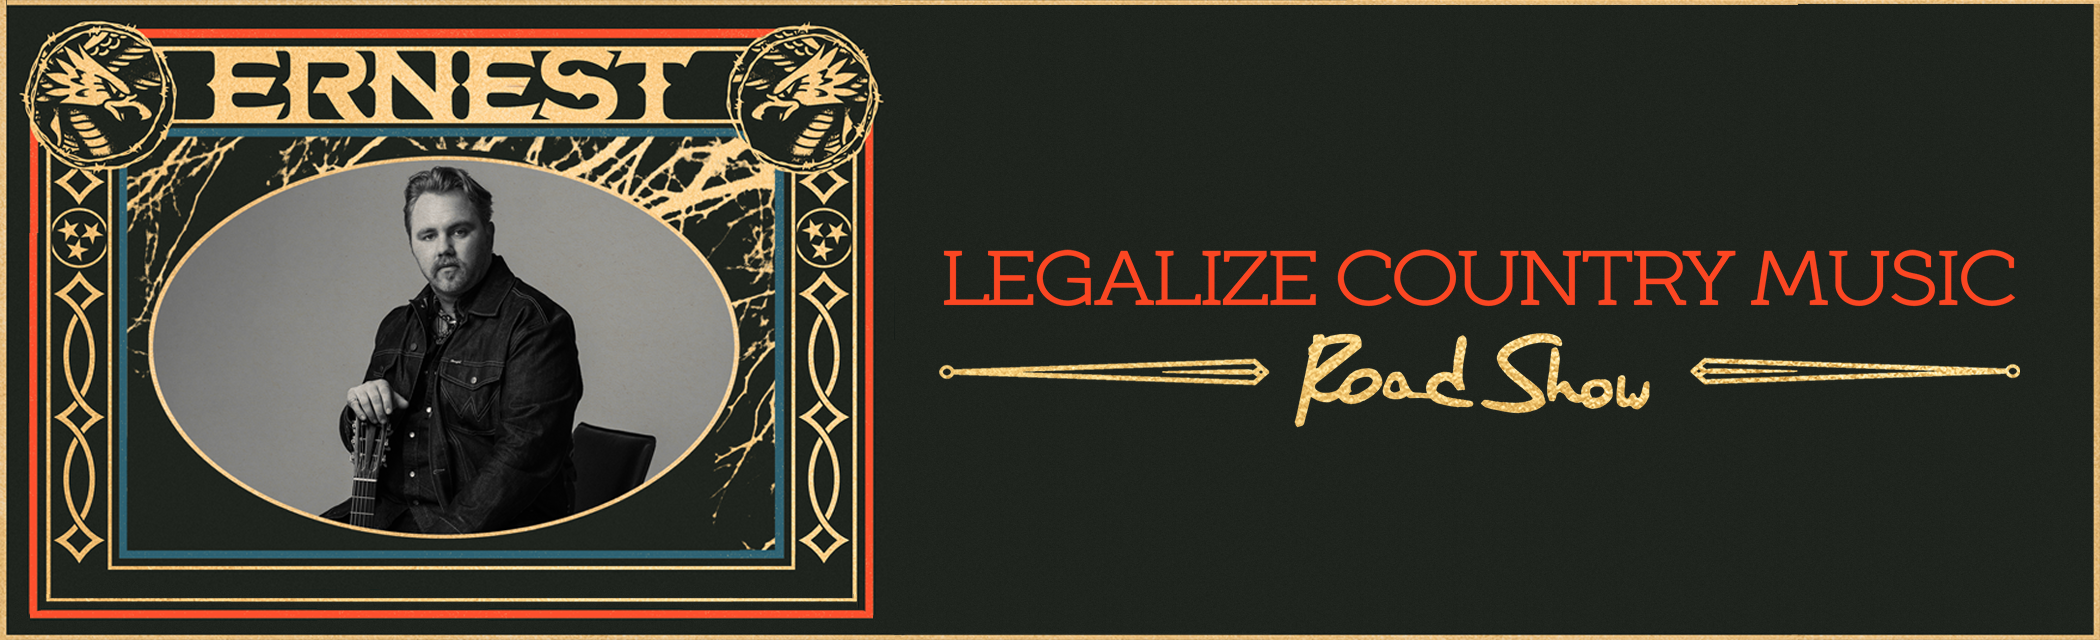 Legalize Country Music Roadshow